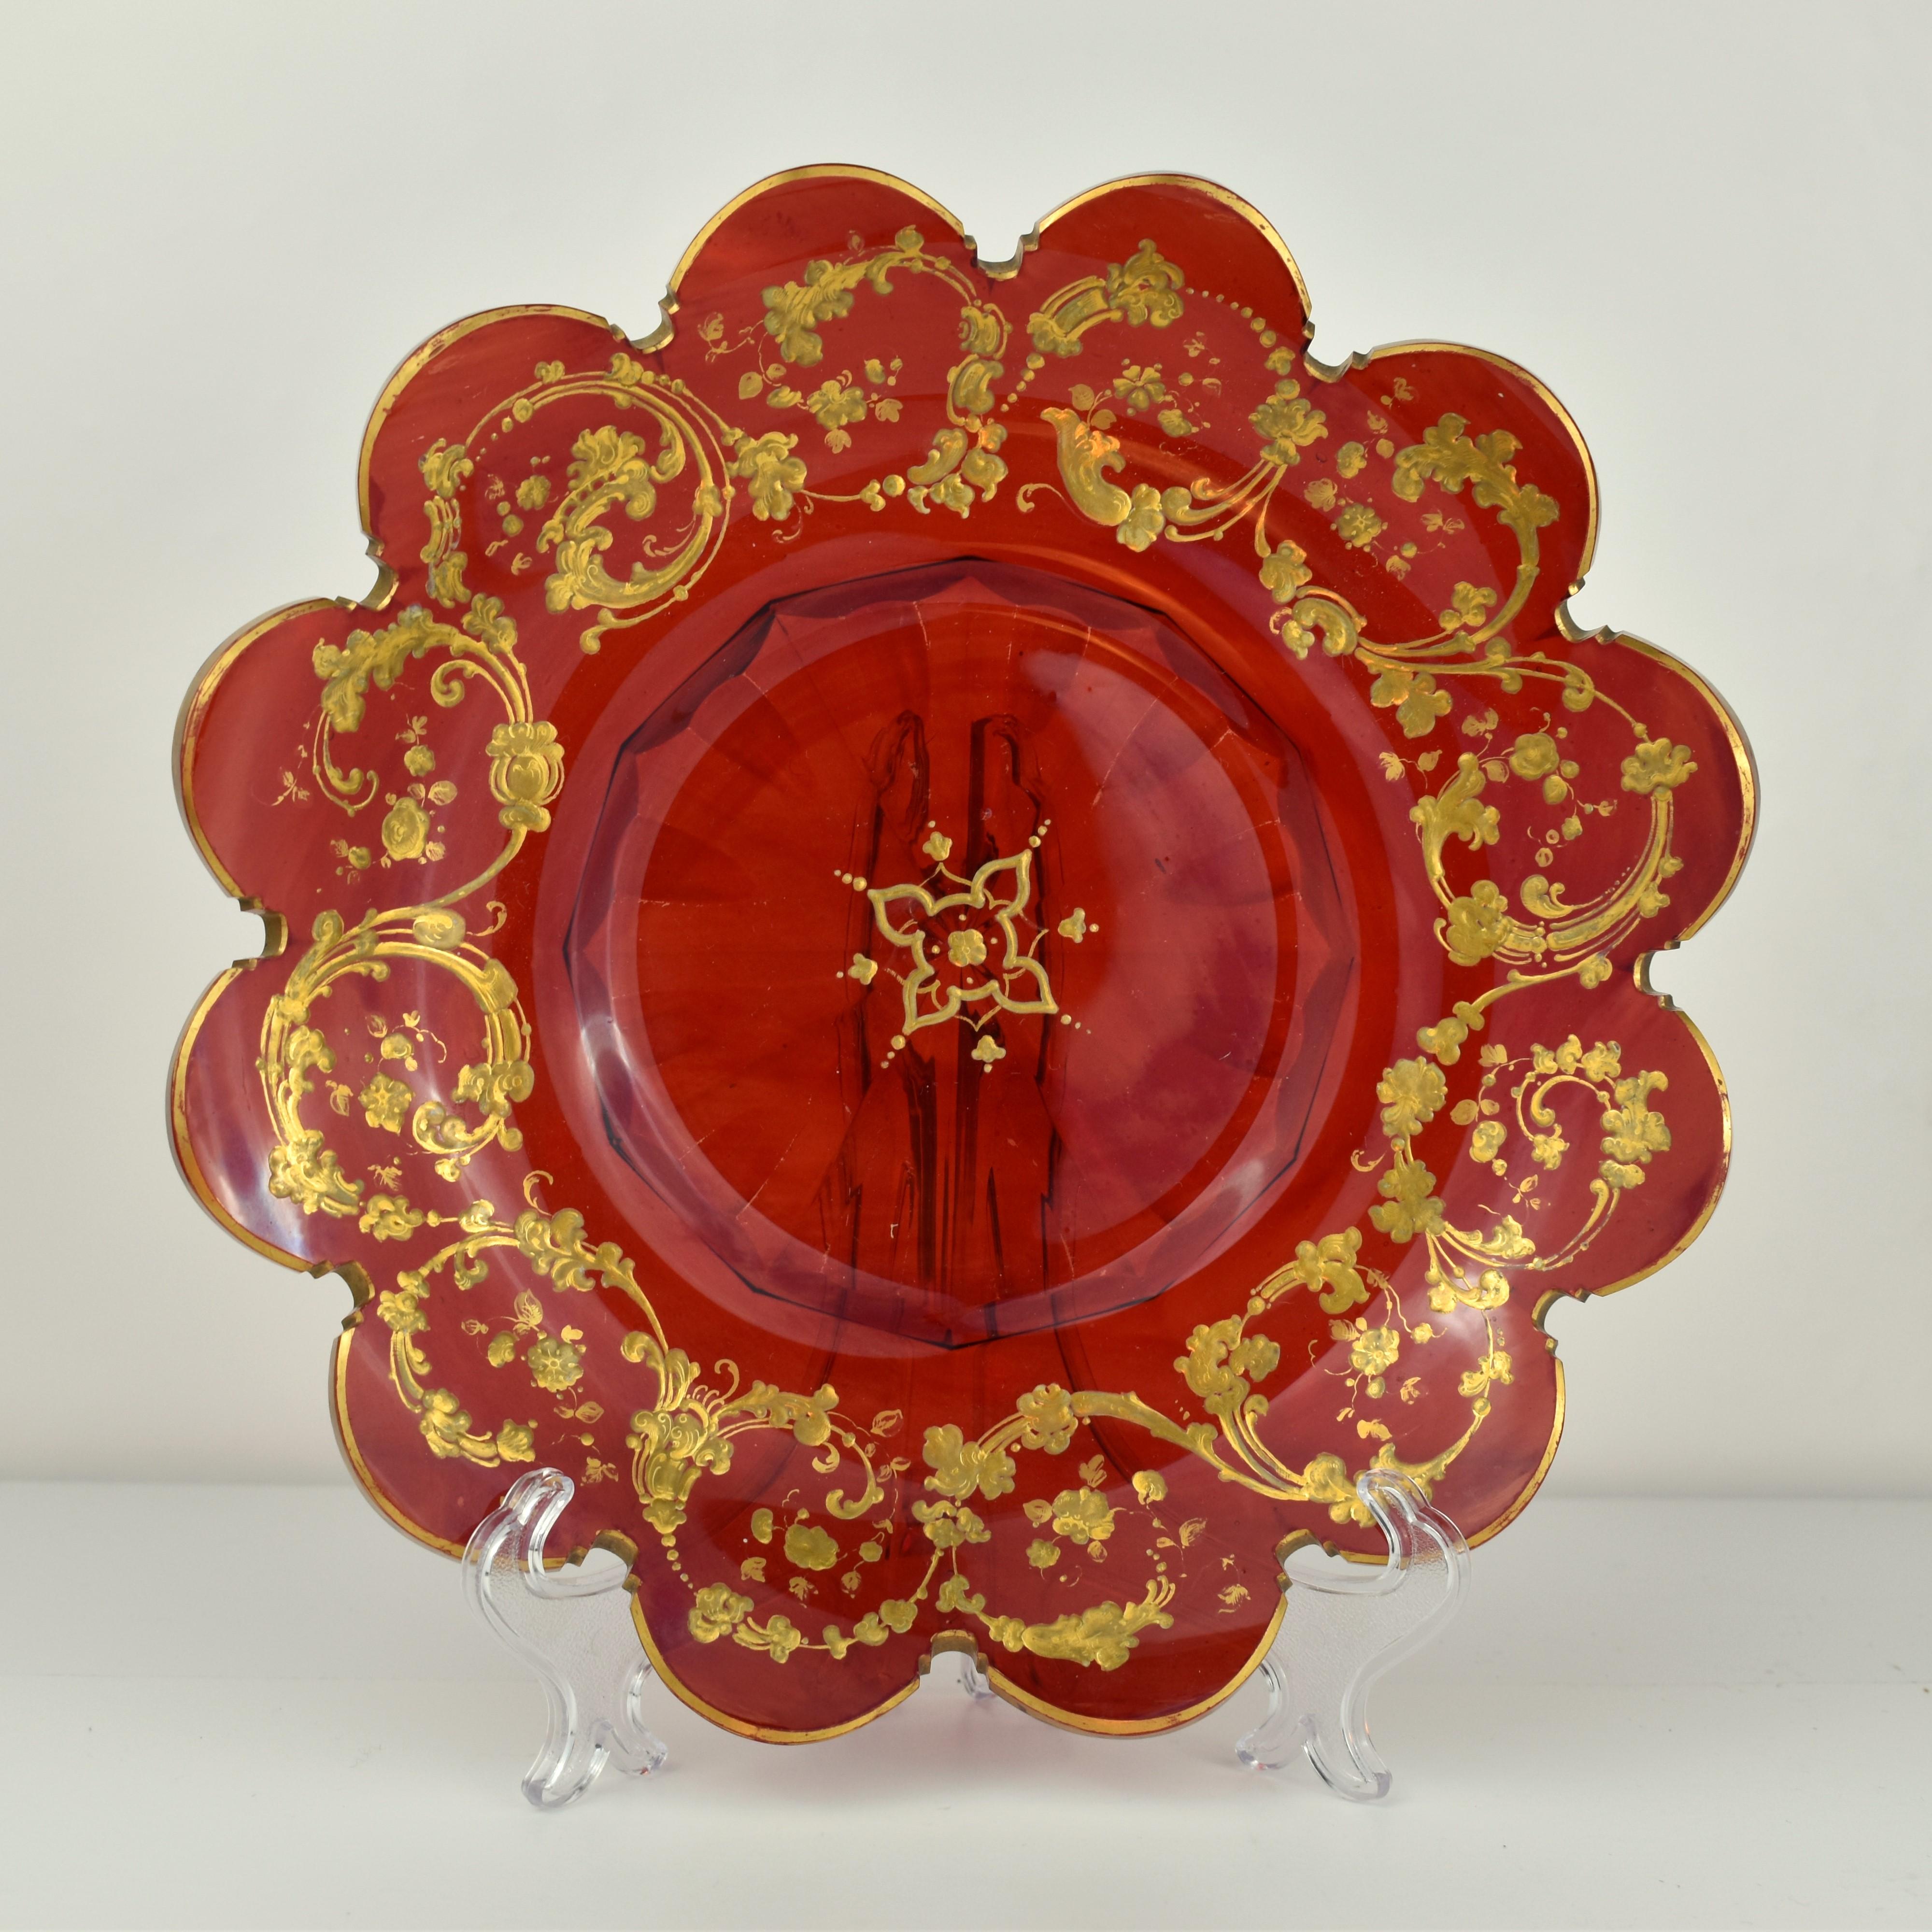 An elegant set of 2 large serving plates in ruby red crystal glass

Profuse gilded enamel decoration all around

Fine example of top quality Bohemien glass manufacture of the 19th century